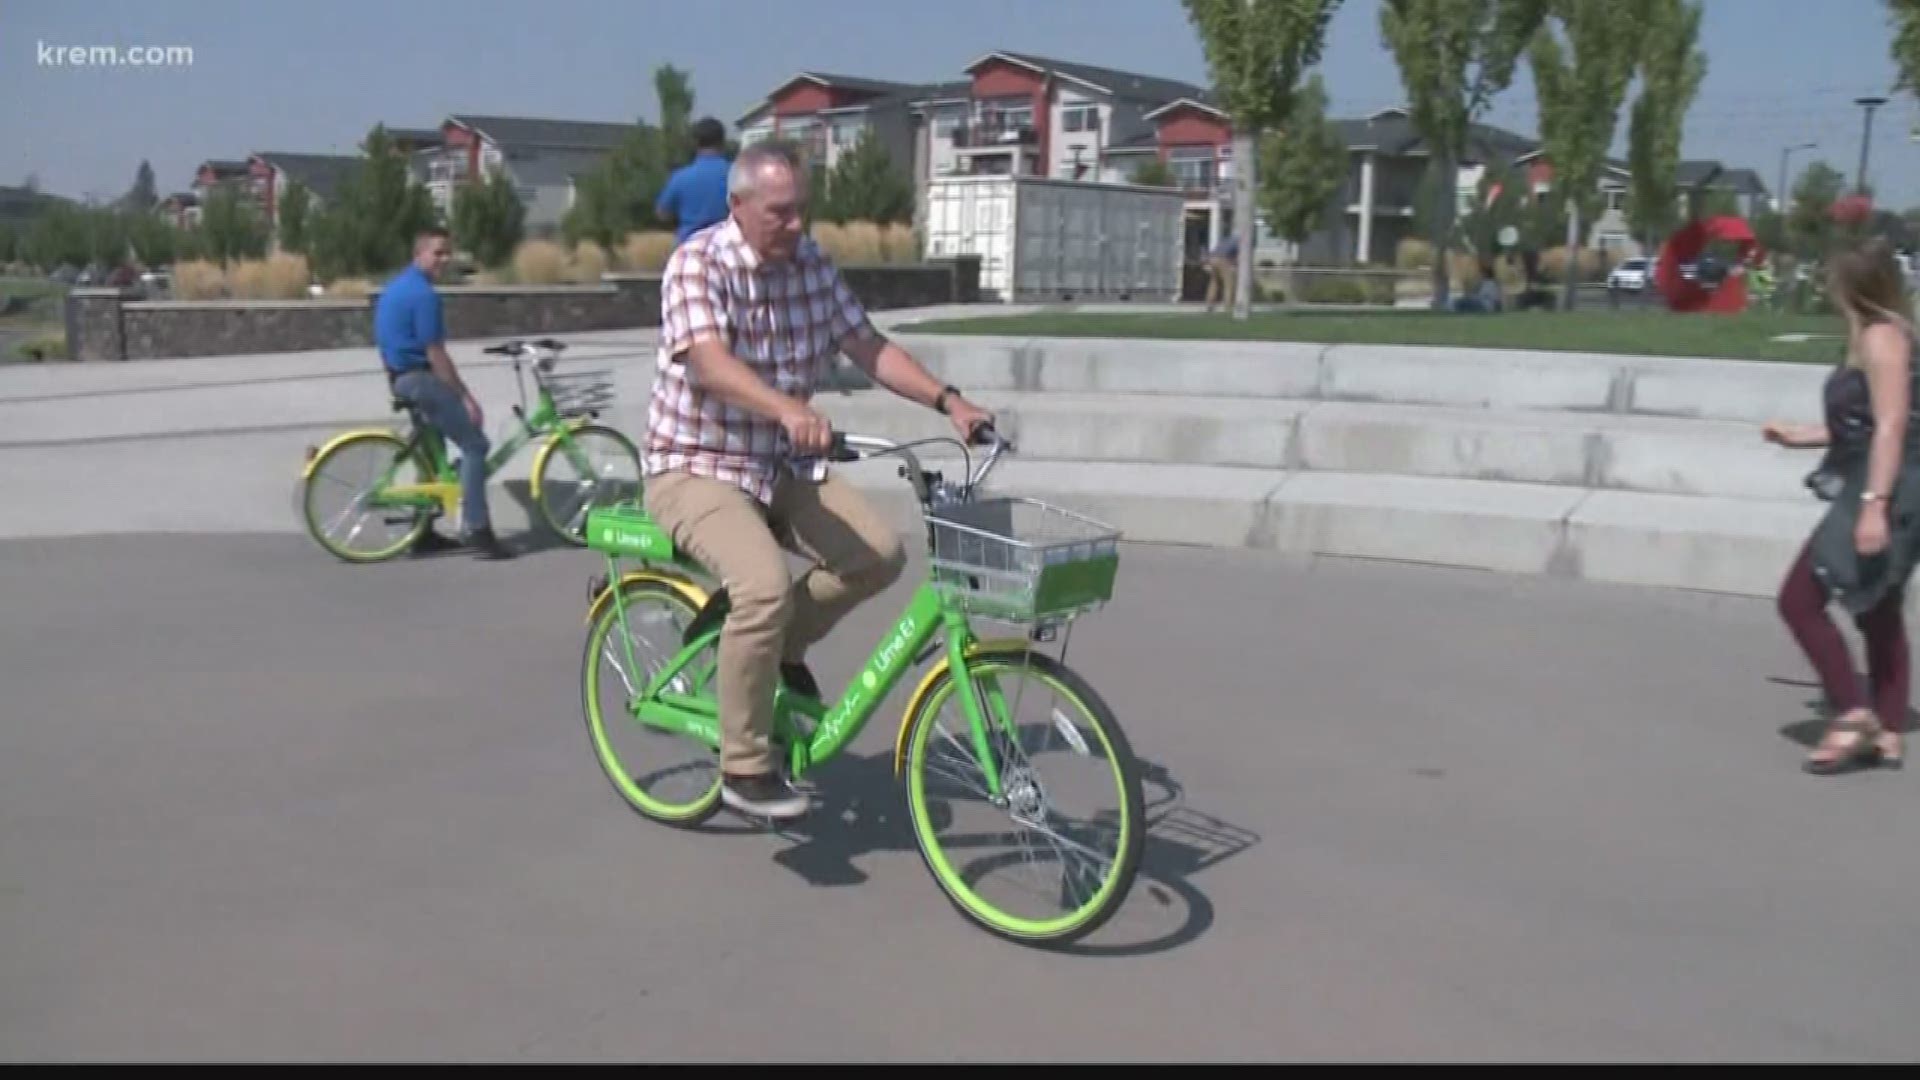 KREM Reporter Amanda Roley explores how the City of Spokane plans to bring back bike sharing this May.